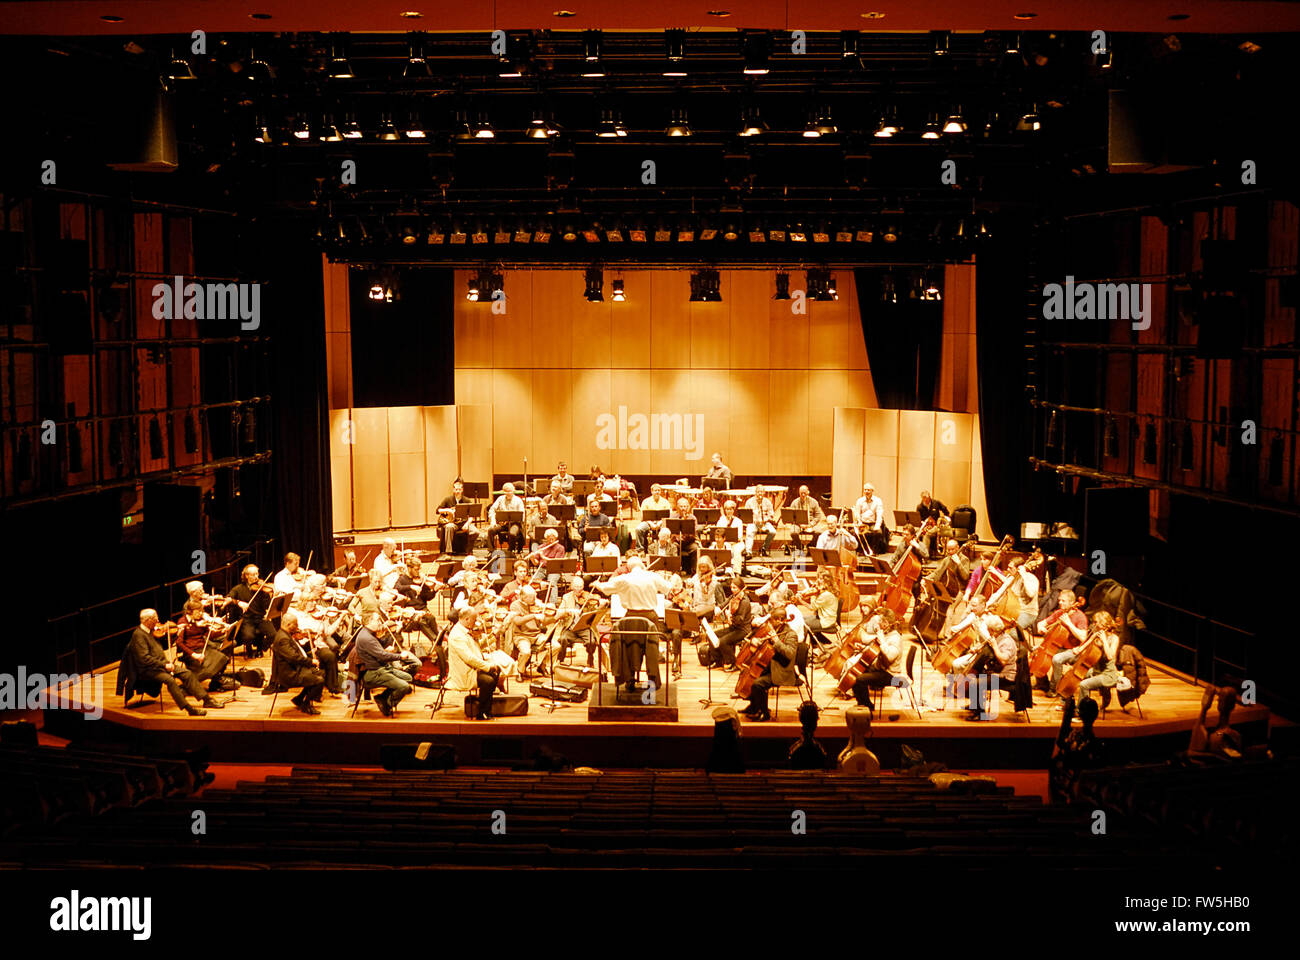 Aminta Chamber Orchestra at rehearsal, Queen Elizabeth Hall, London, conducted by Professor Dr. Donald Hoskins MBE. Stock Photo